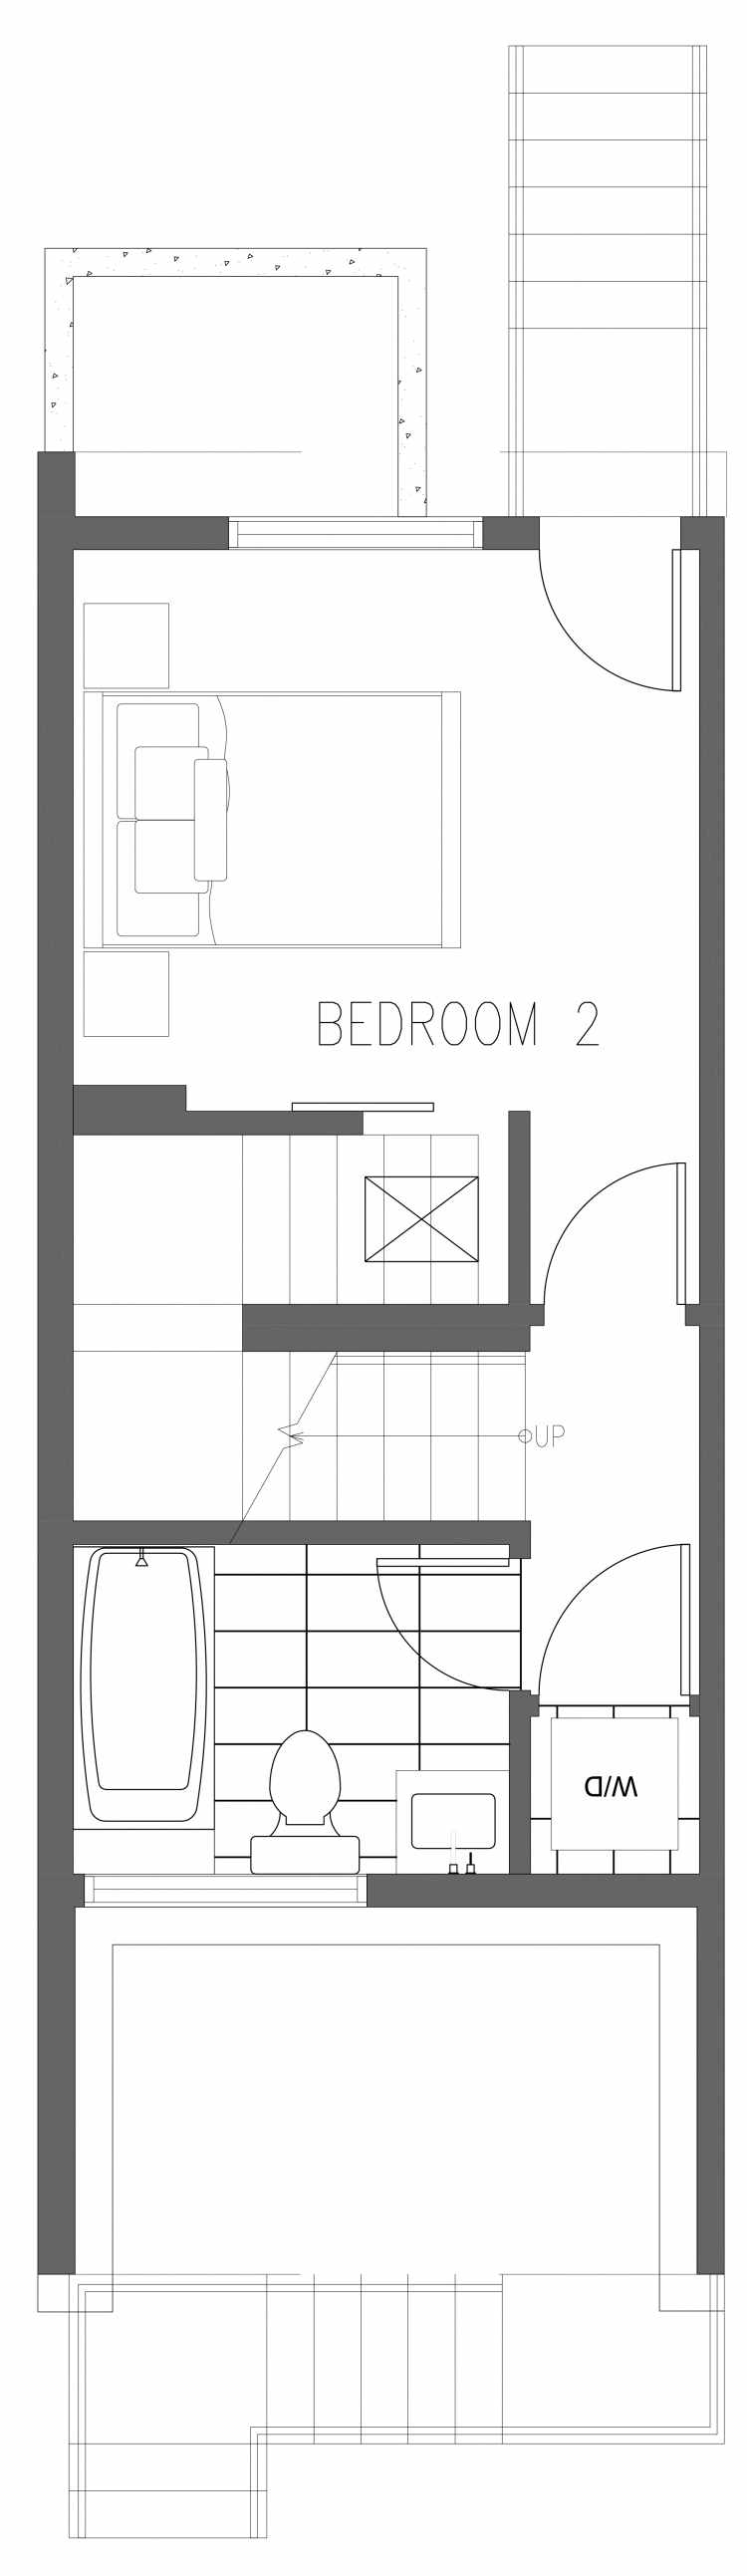 First Floor Plan of 2363 Beacon Ave S, One of the Brea Townhomes in North Beacon Hill